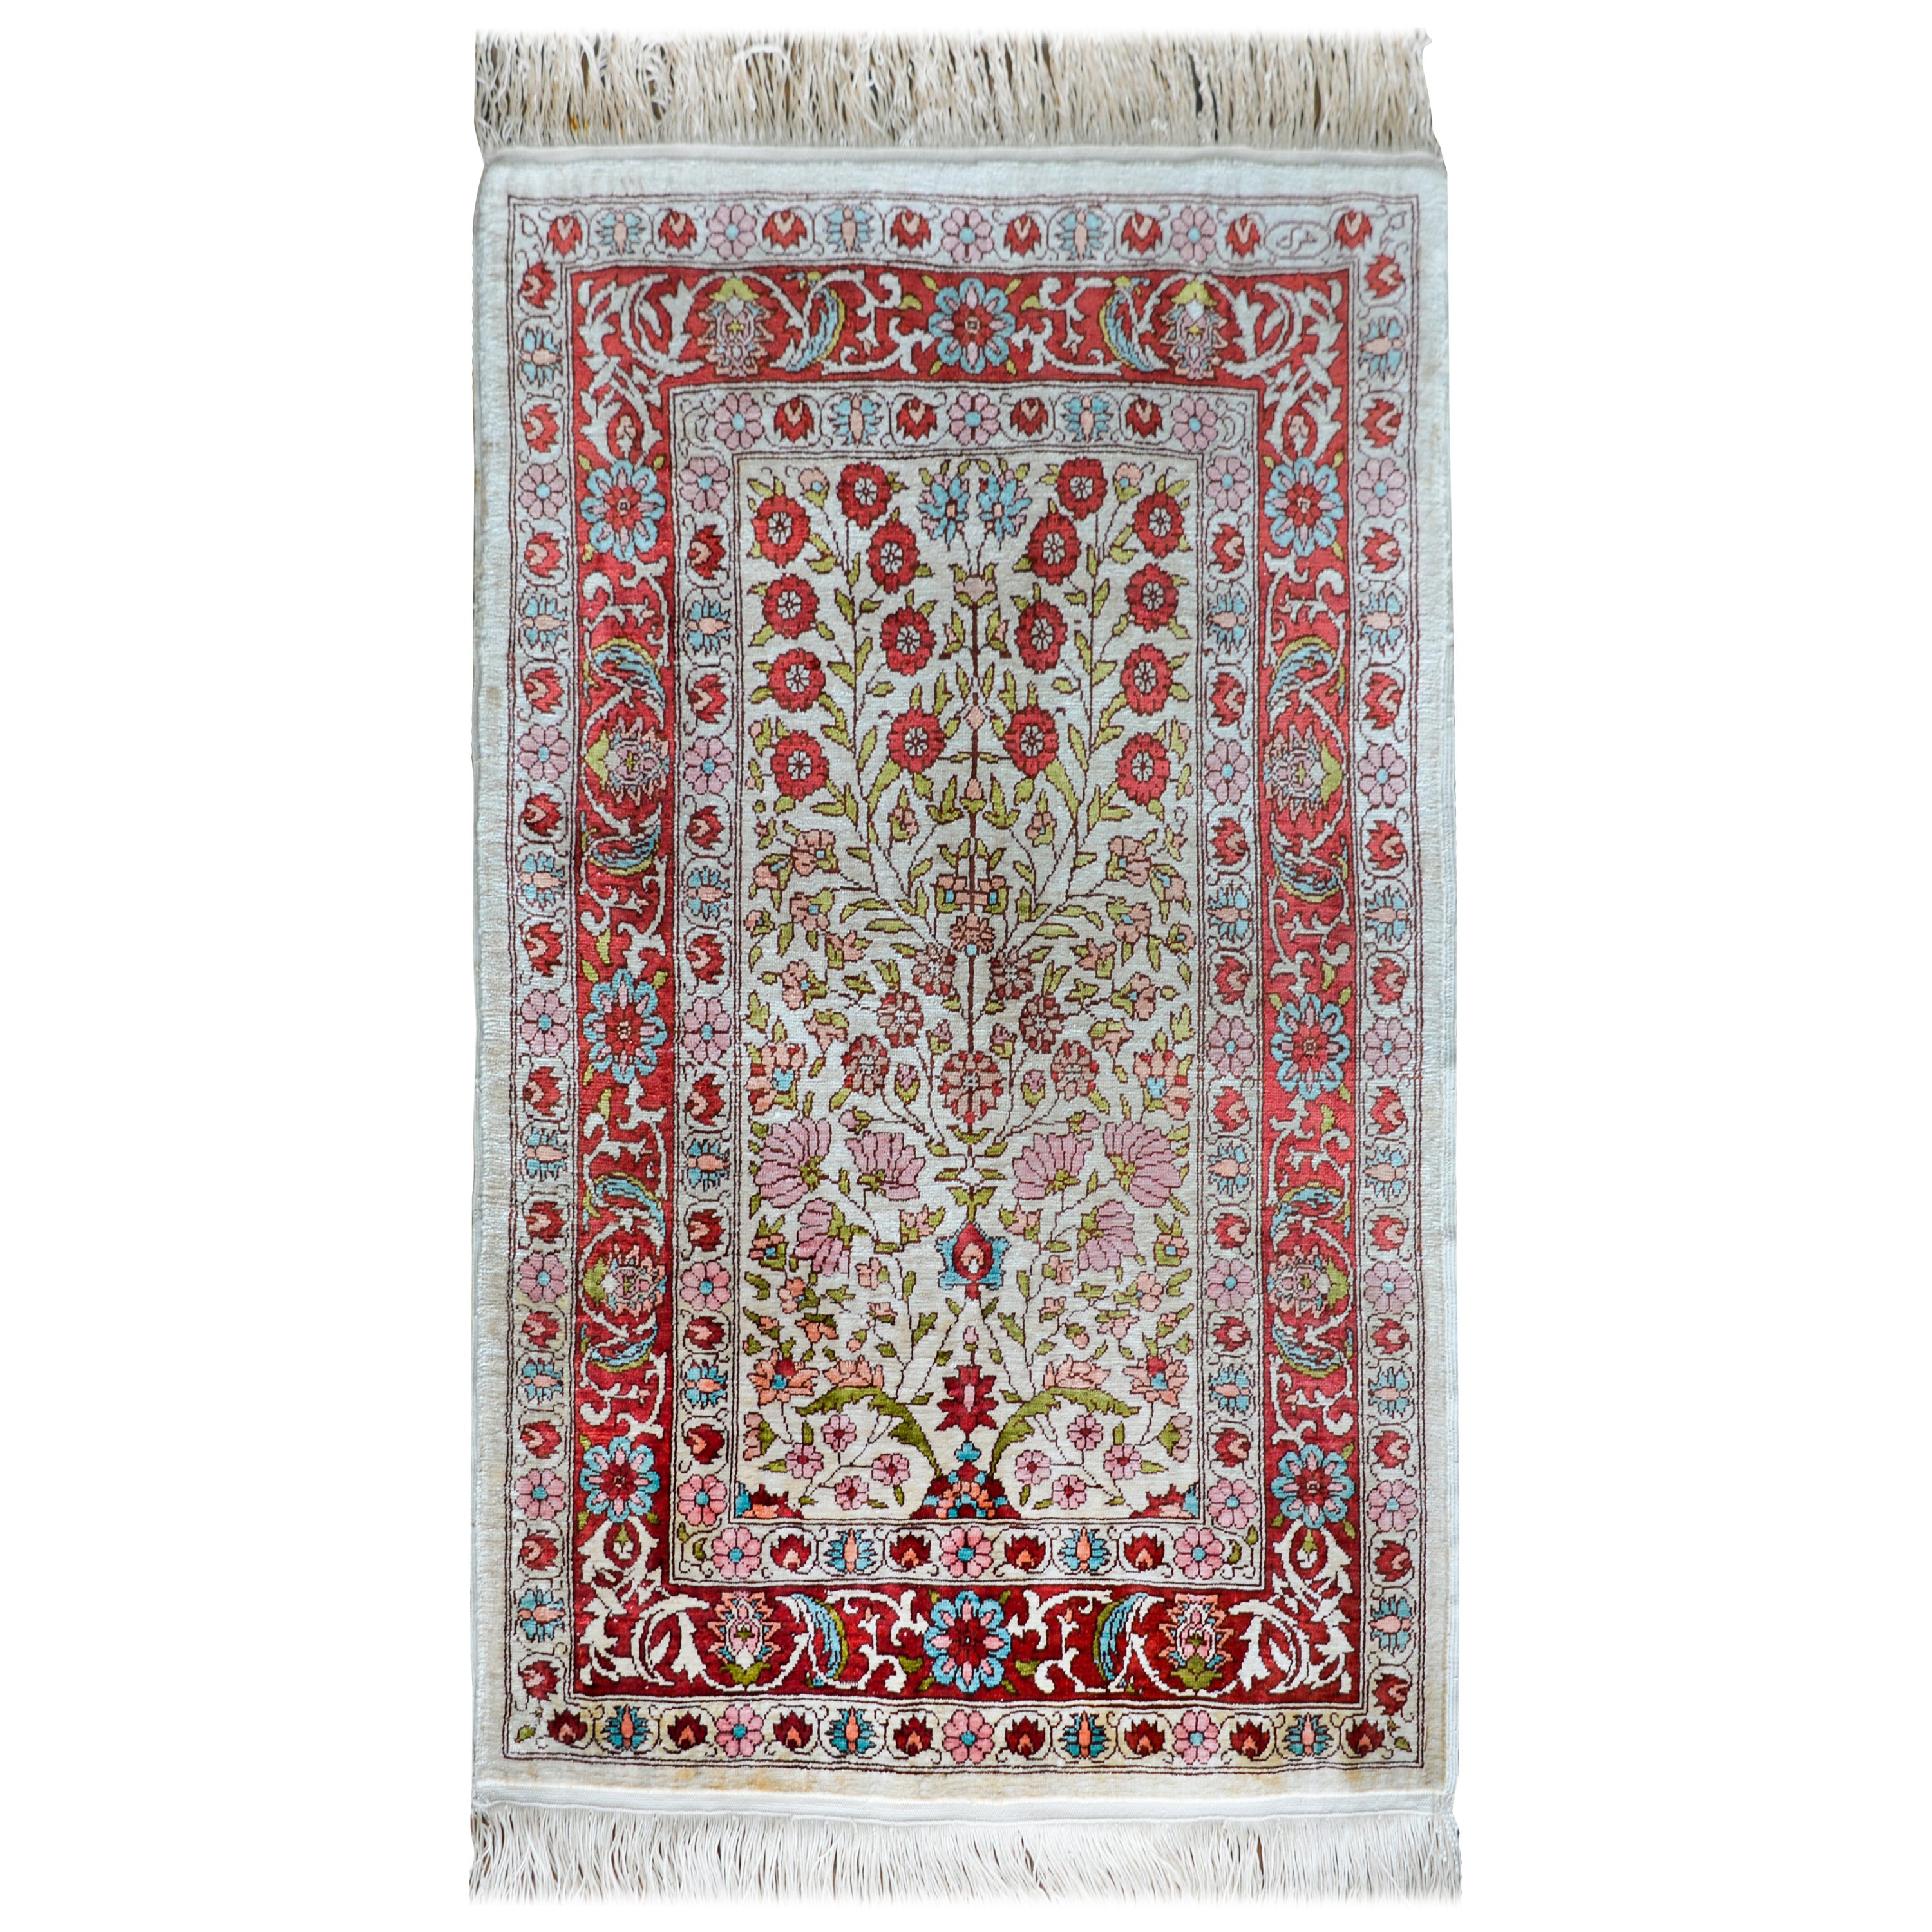 How can I tell if a Hereke rug is real?